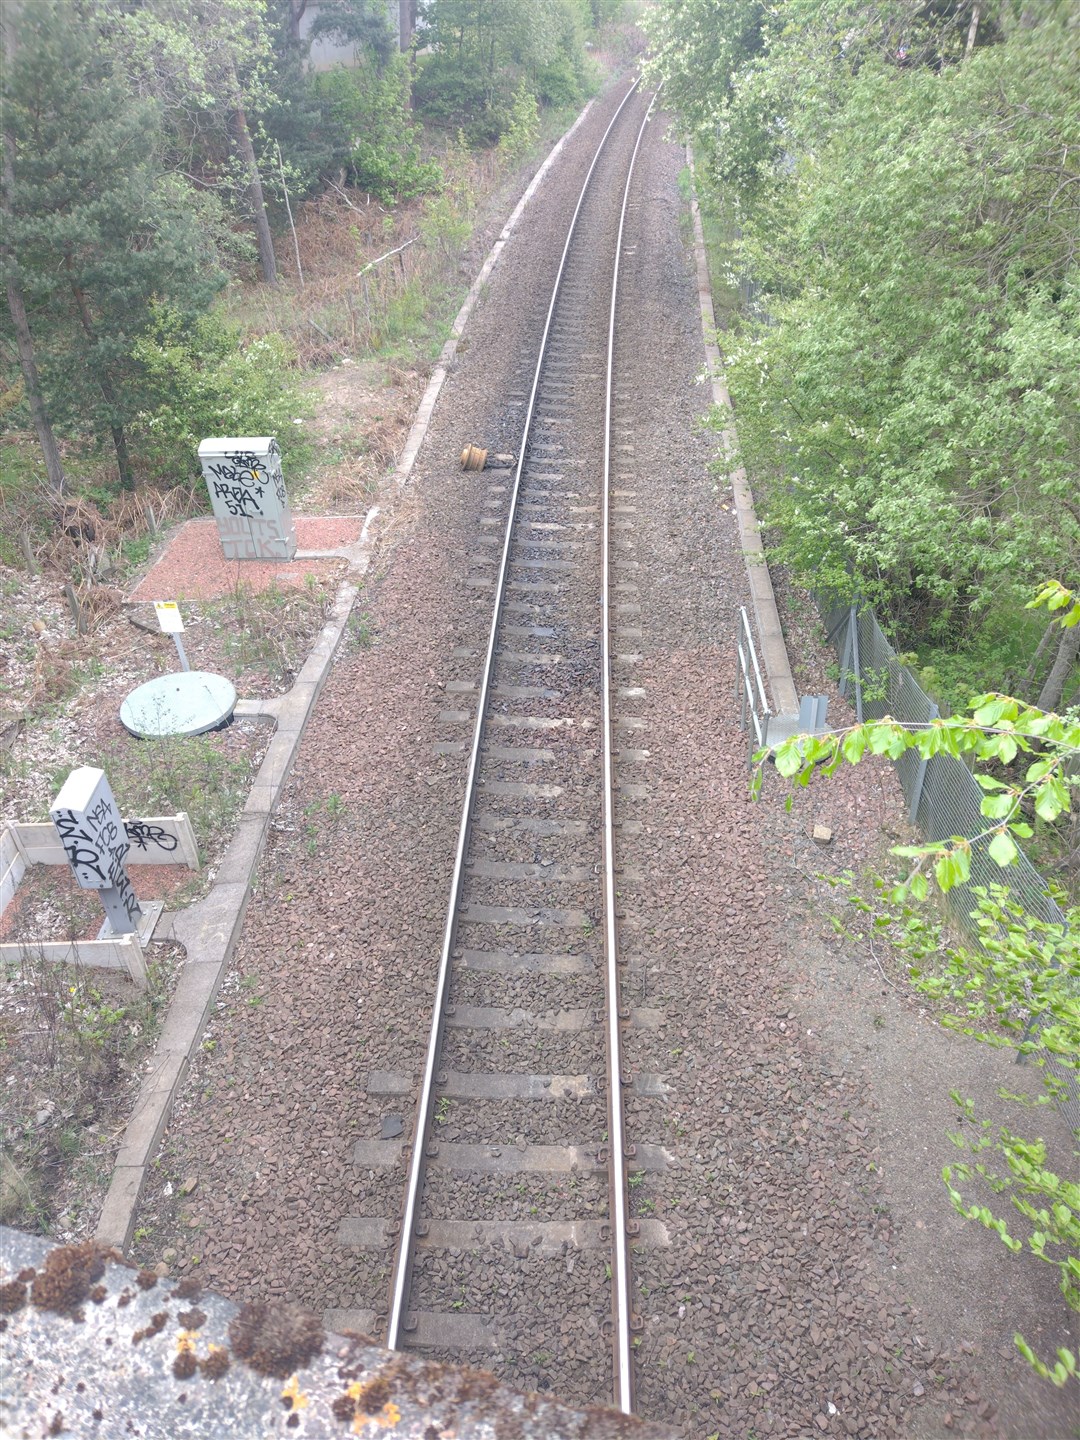 The Highland Main Line was disrupted after the Aviemore incident and no trains passed through the strath for the rest of the evening and night